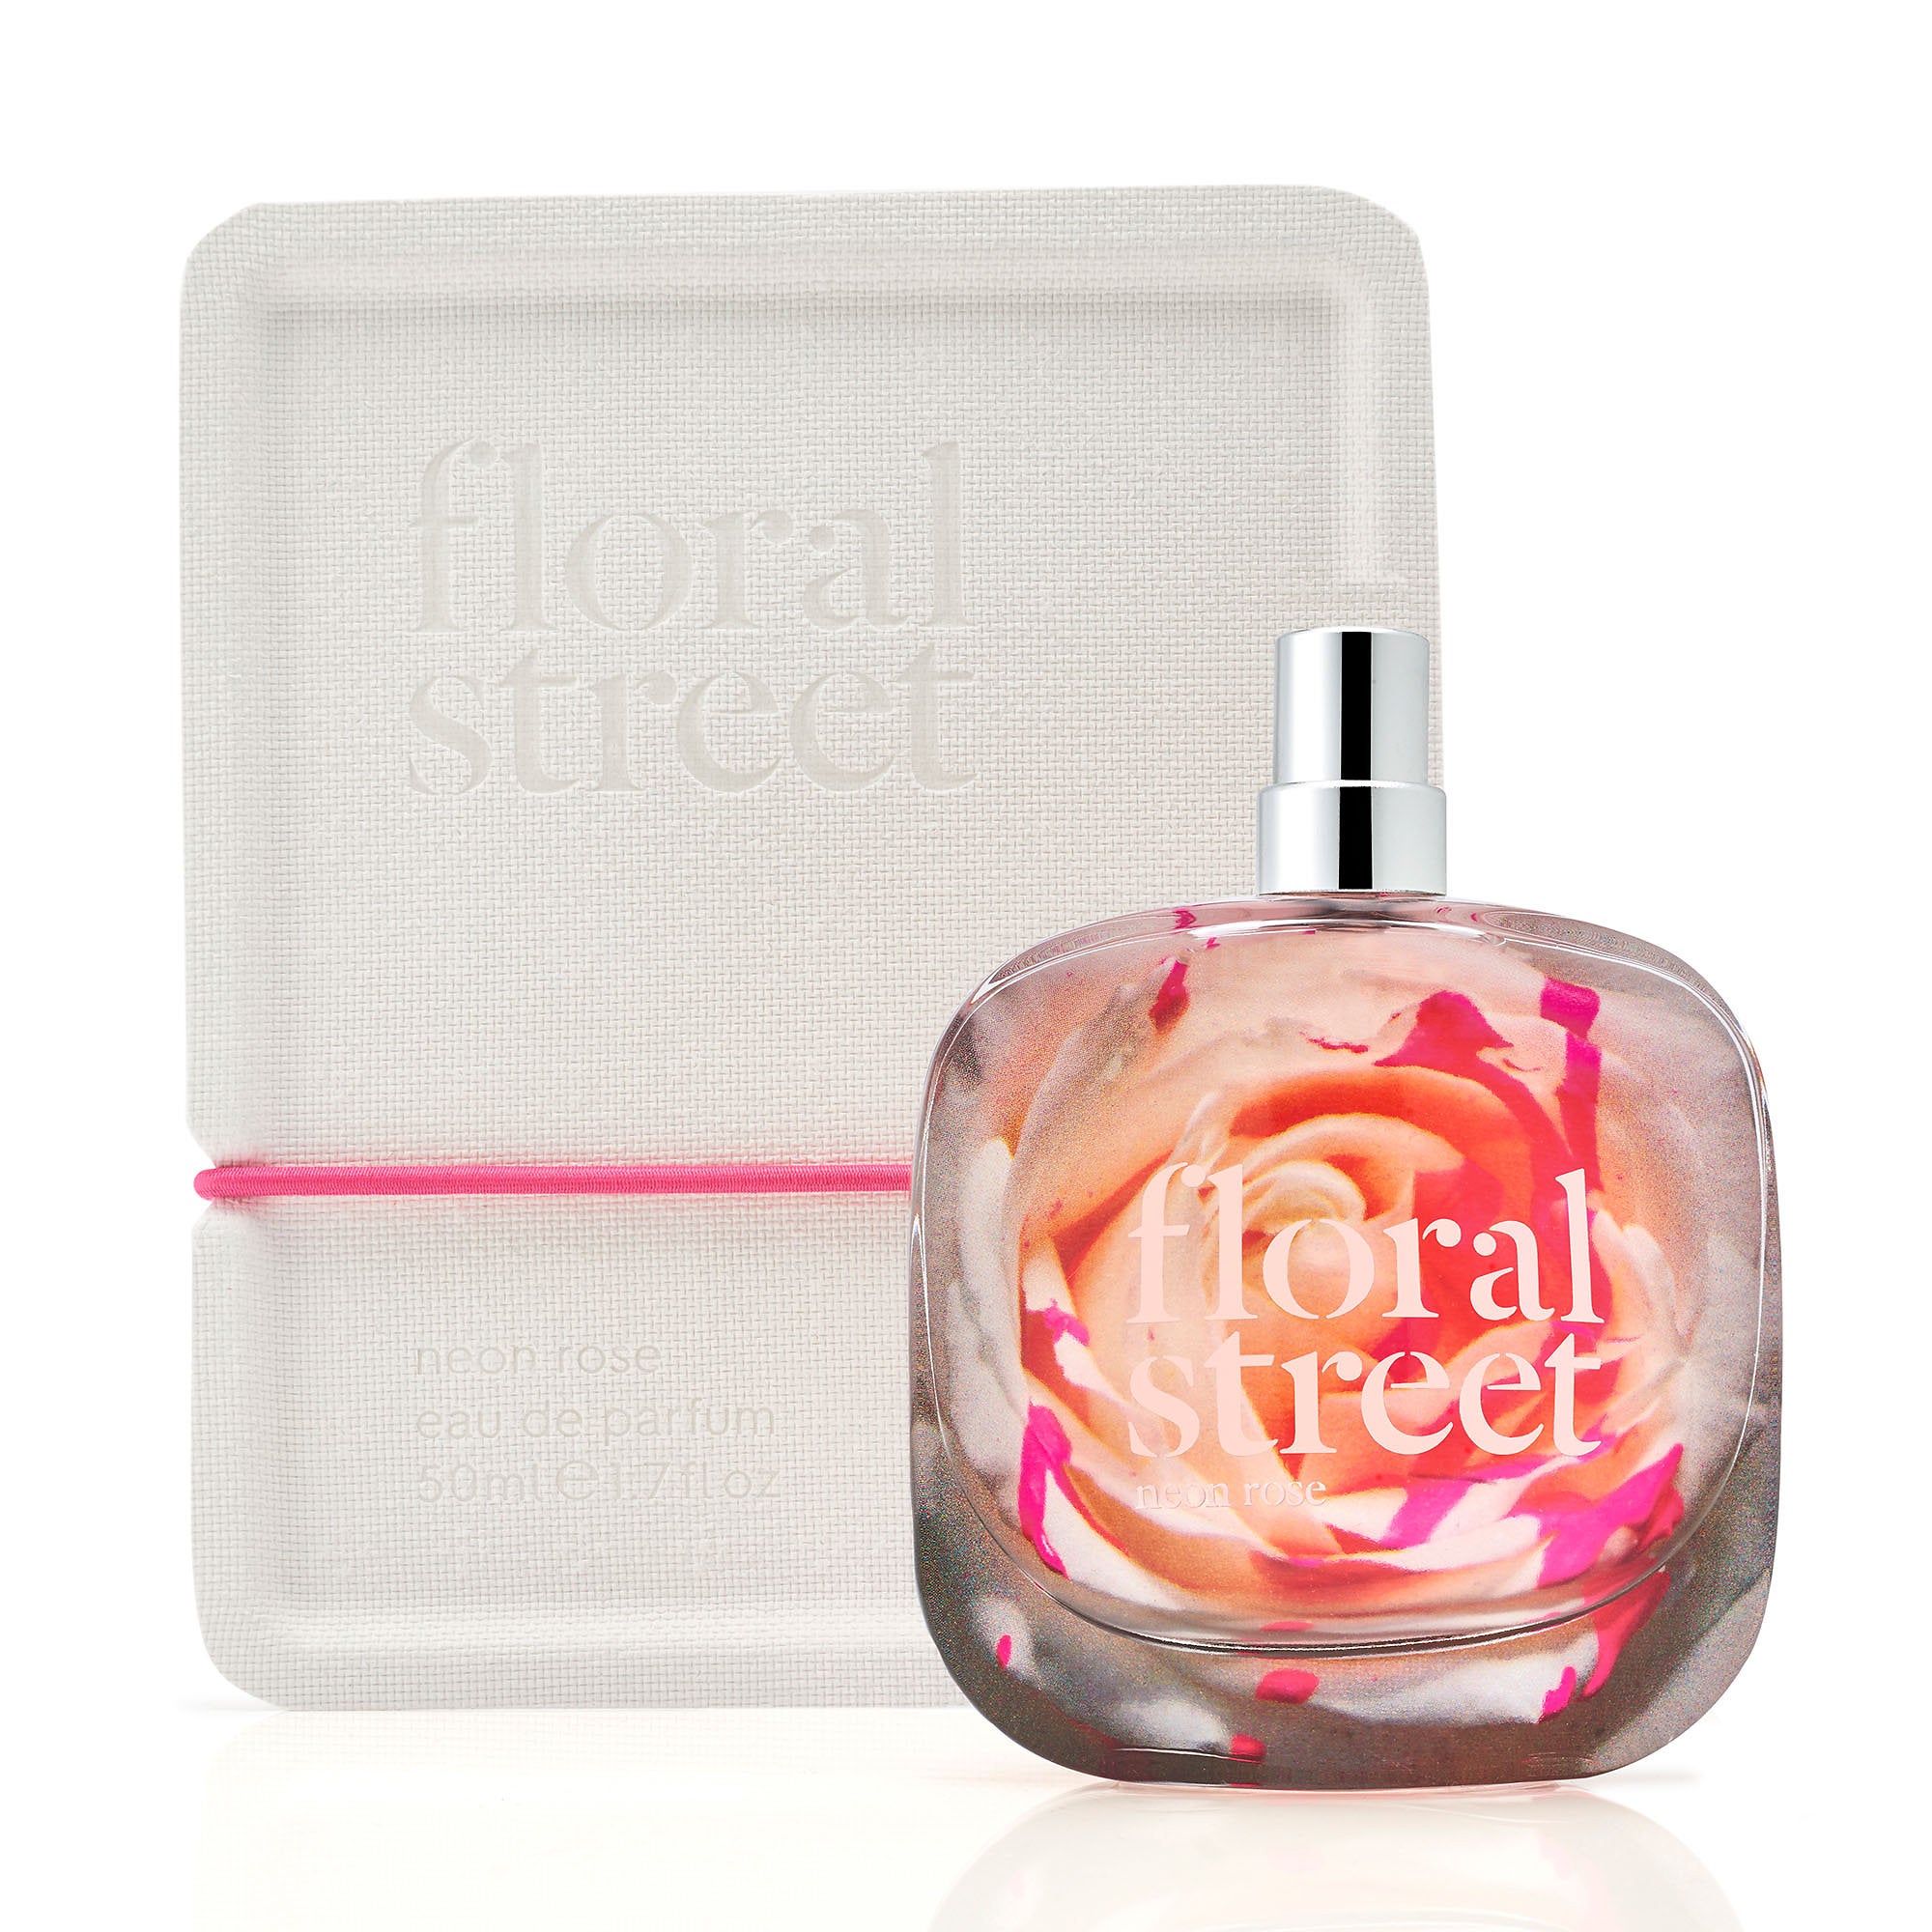 Floral Street, Perfume Company, Launches At Sephora: Exclusive Details ...